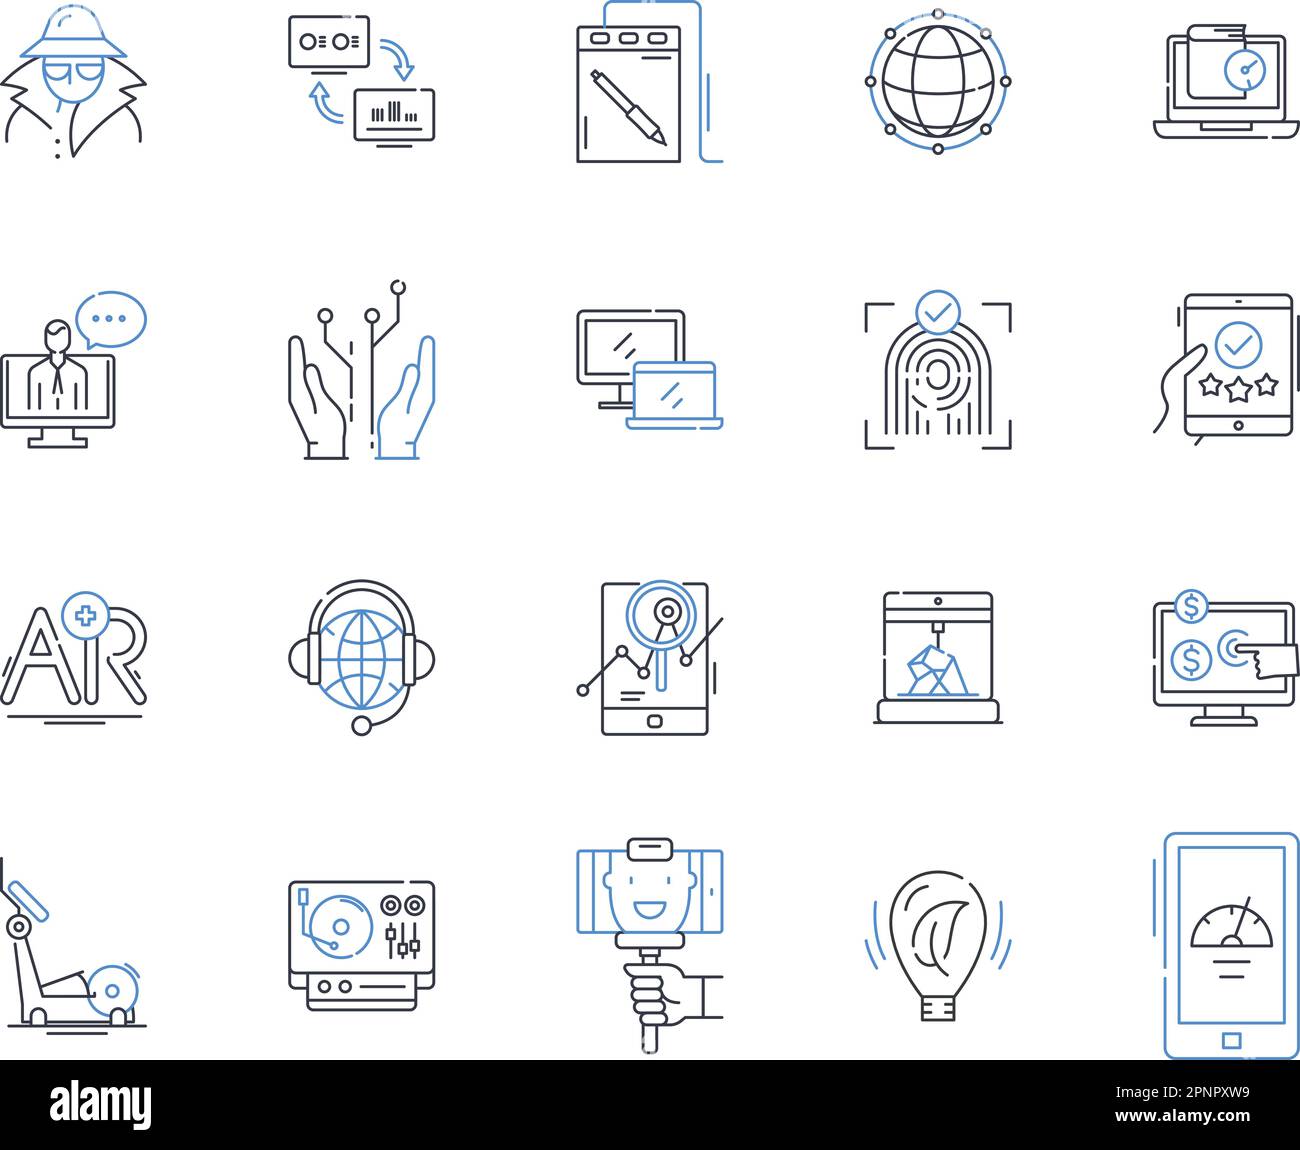 Wireless tech line icons collection. Bluetooth, Wi-Fi, NFC, Infrared, G, Antenna, Router vector and linear illustration. Modem,Satellite,Broadband Stock Vector